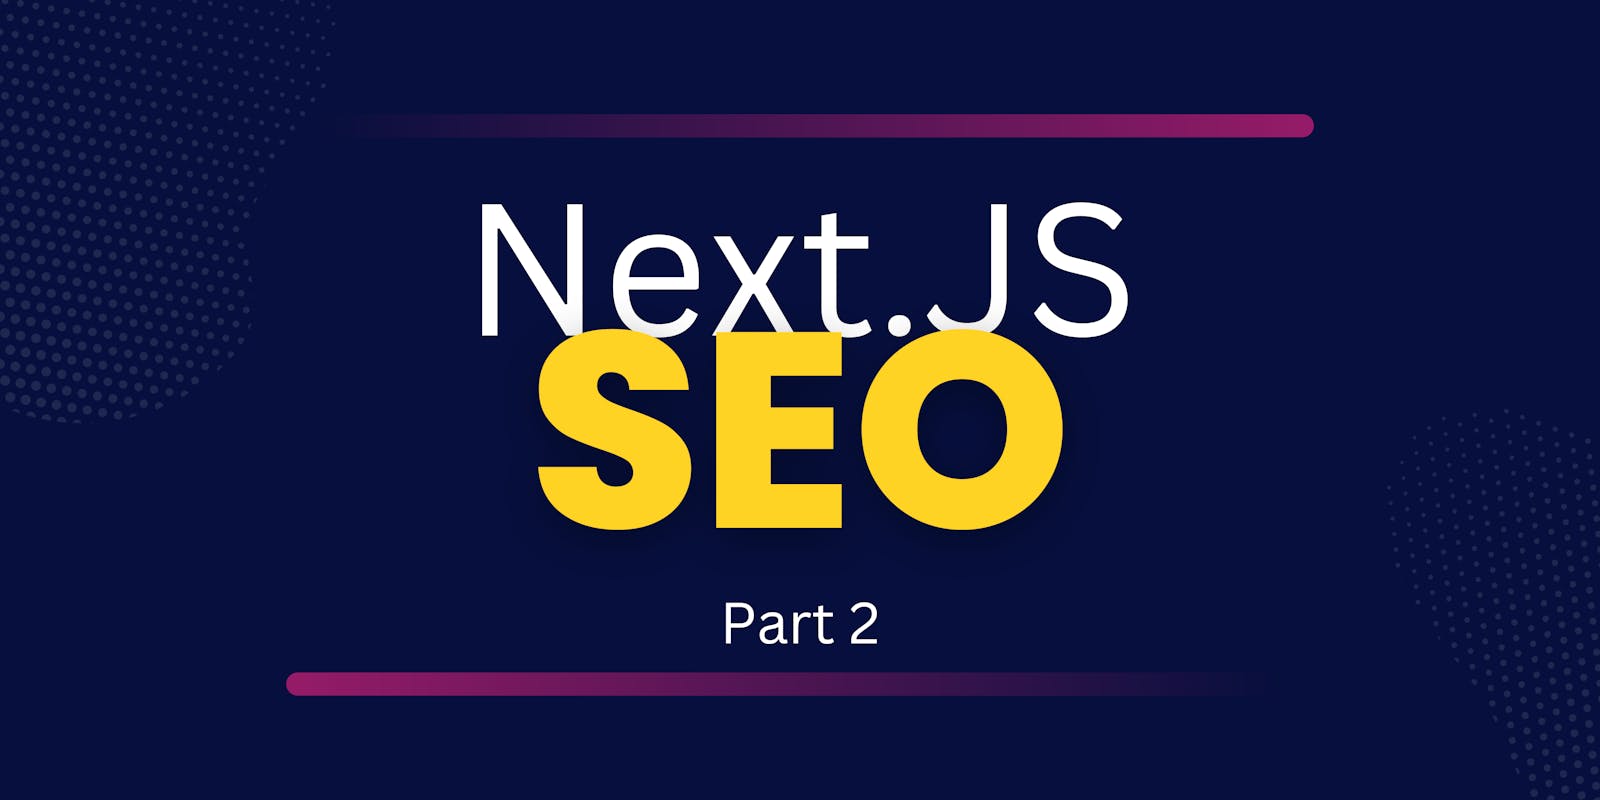 Next.js SEO Optimization for Developers and SEO Experts: Part 2 - Performance, Web Vitals, and Advanced Strategies